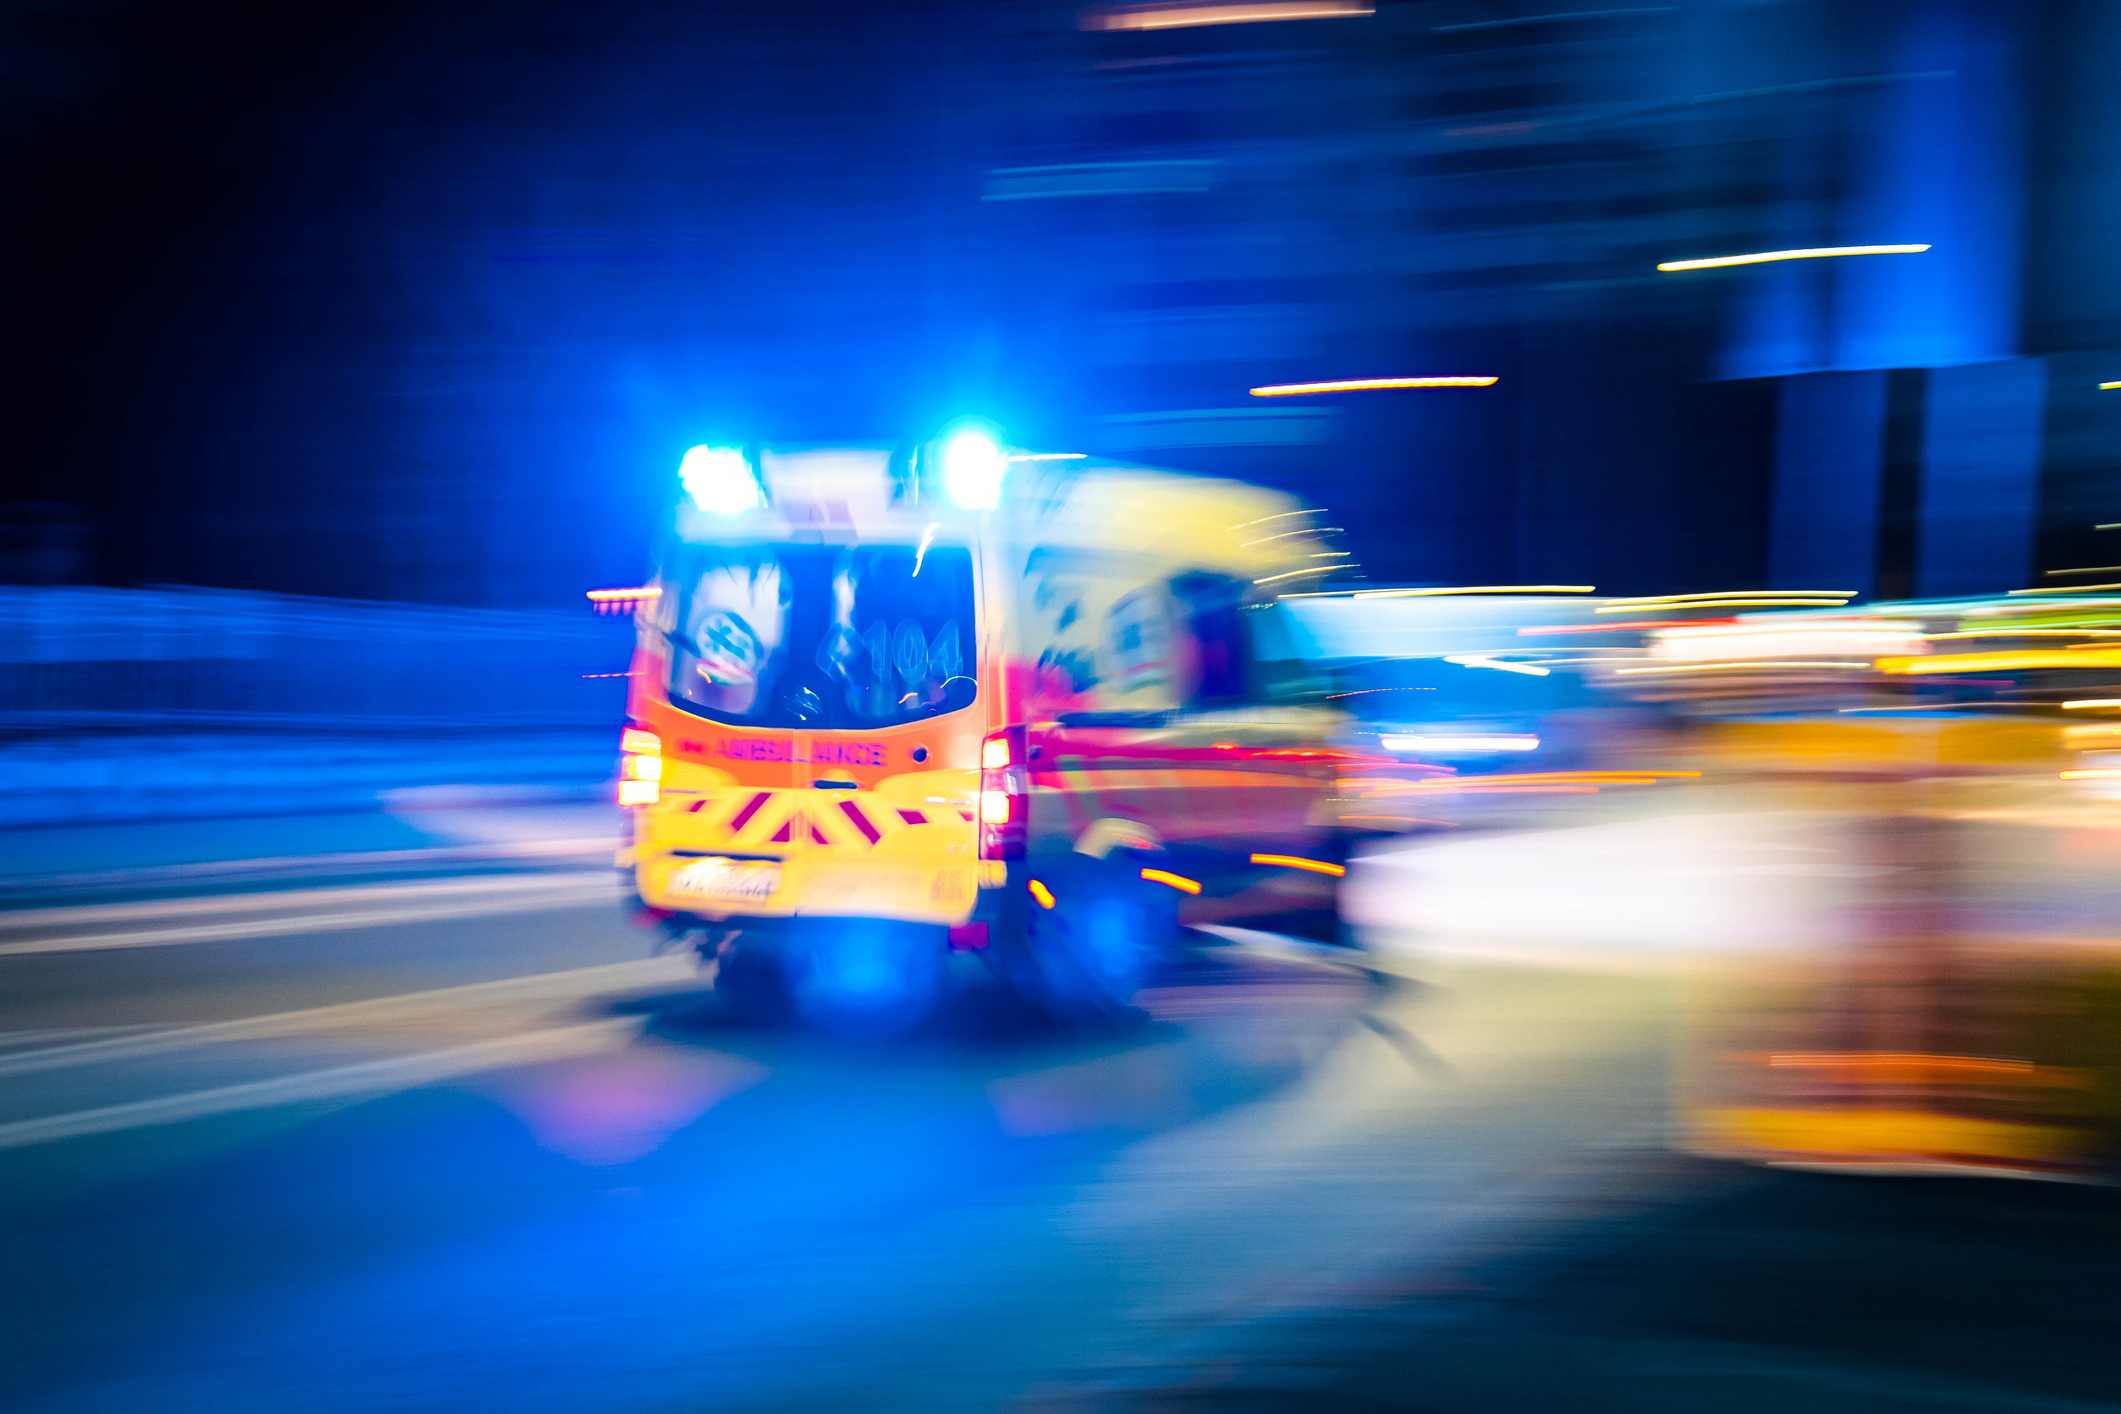 Blurred image of a moving ambulance with its emergency lights on at nighttime